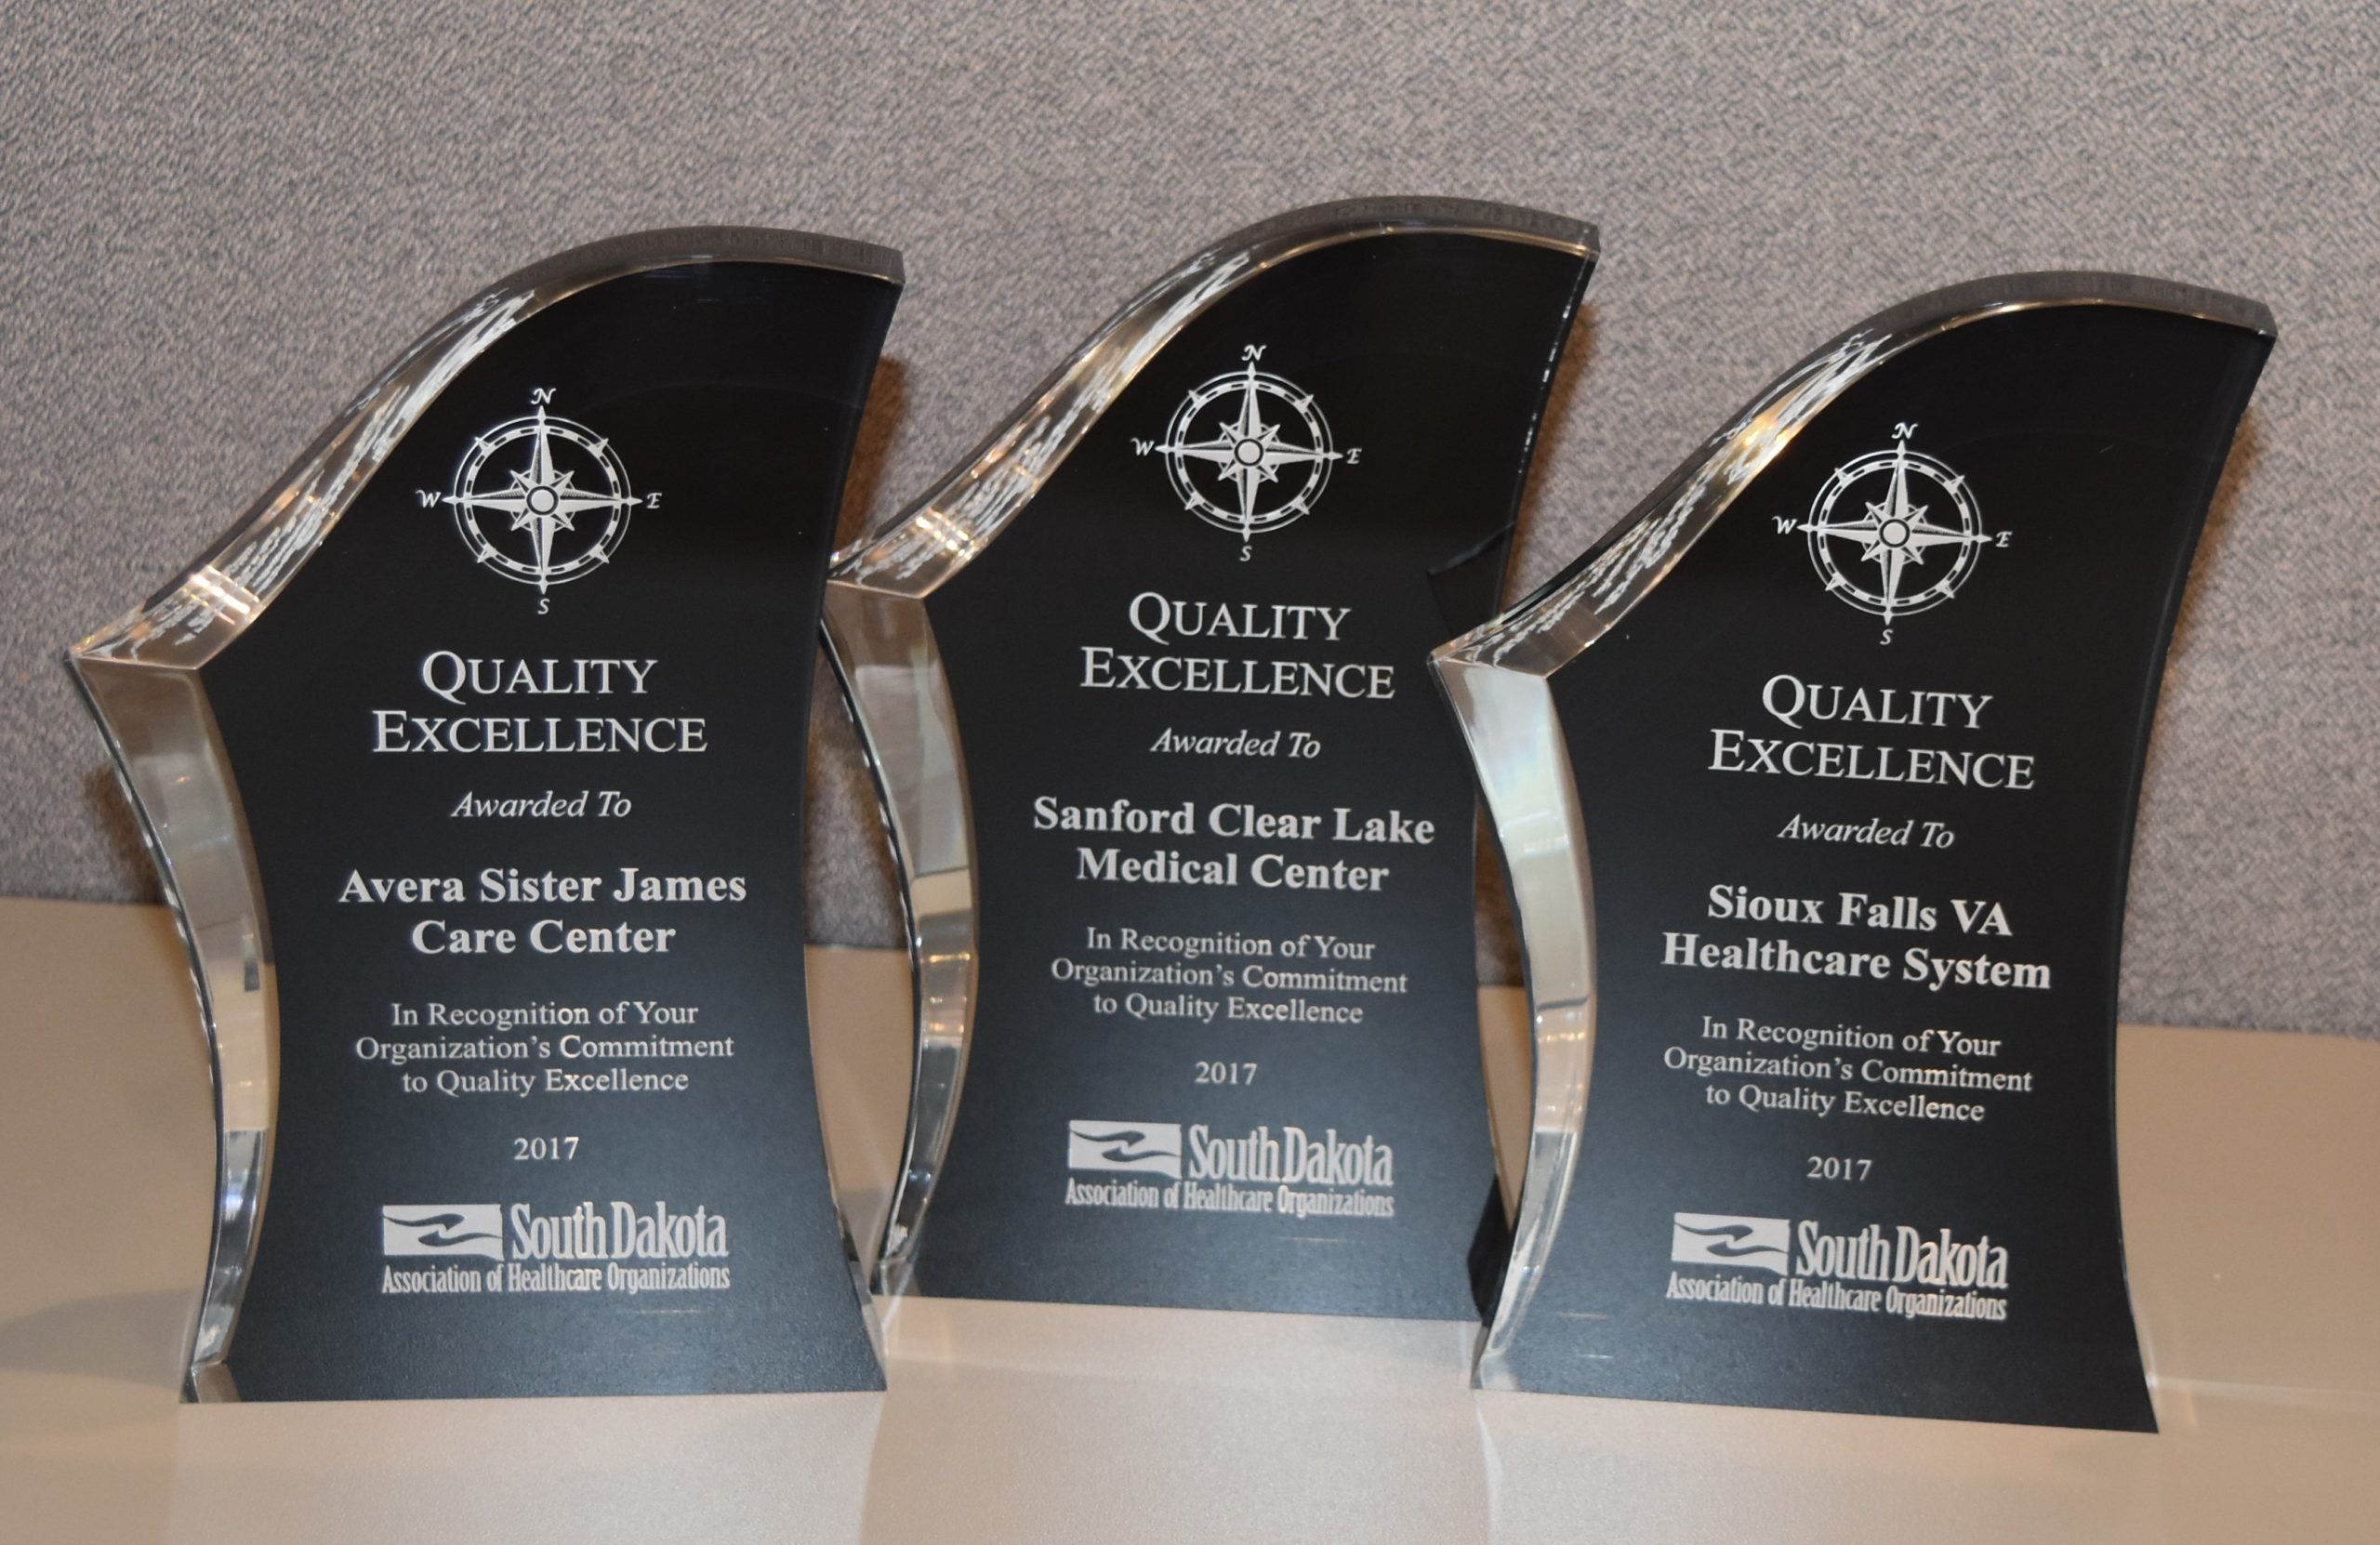 Make quality better. Award of Excellence. Quality Award. Excellency перевод. SAP quality Awards.